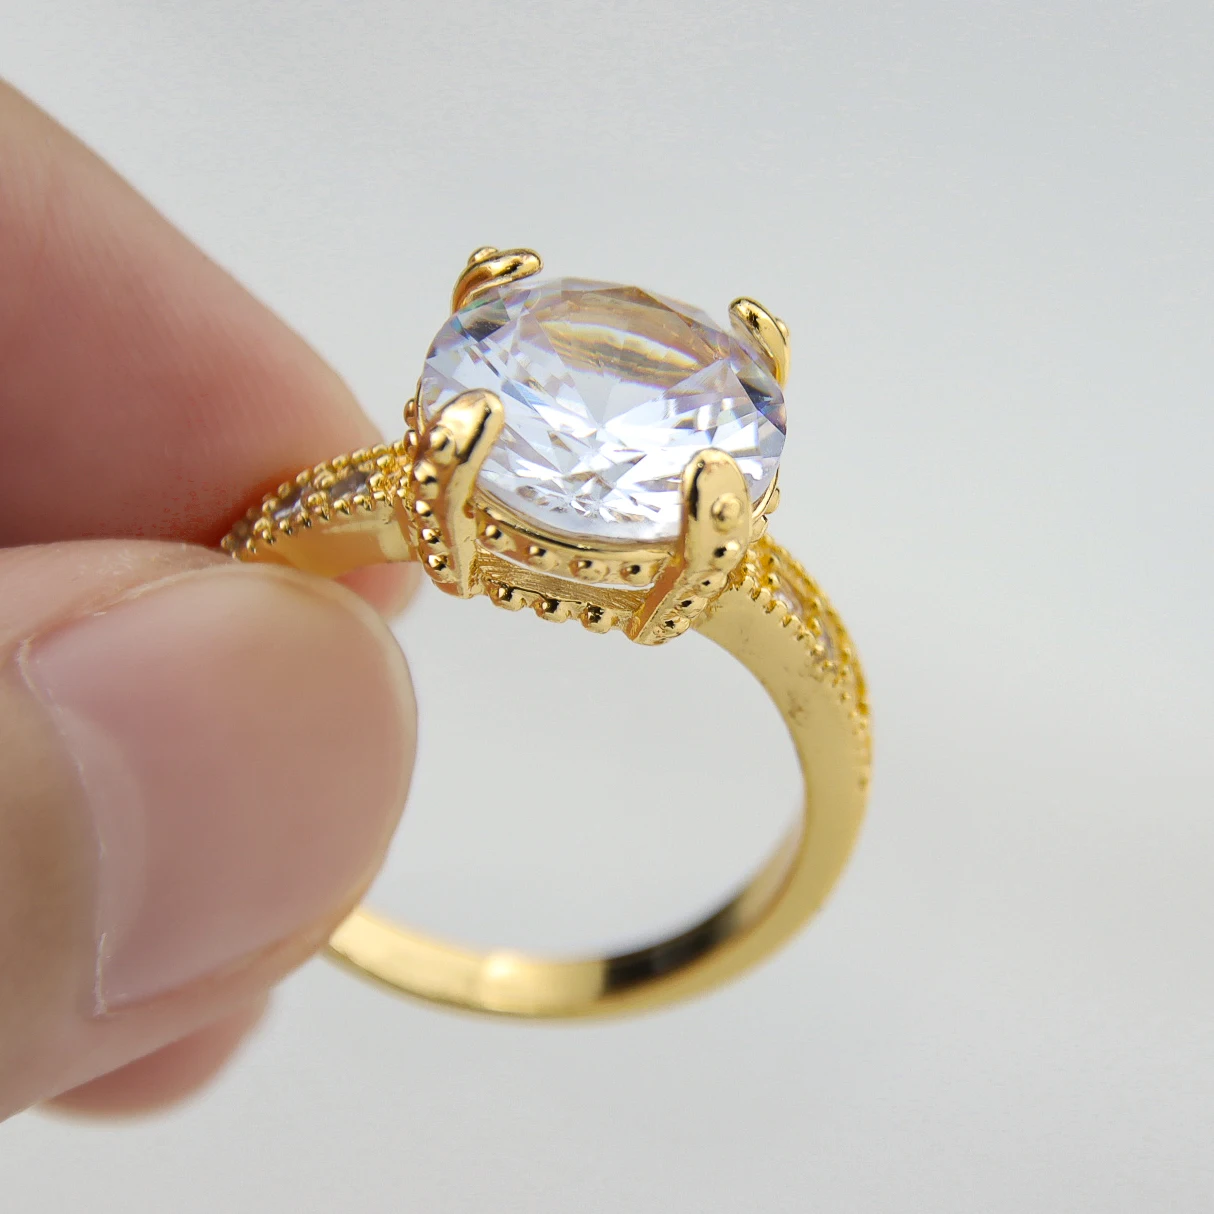 Jewelry Photo Editing Services India | Image Editing Company